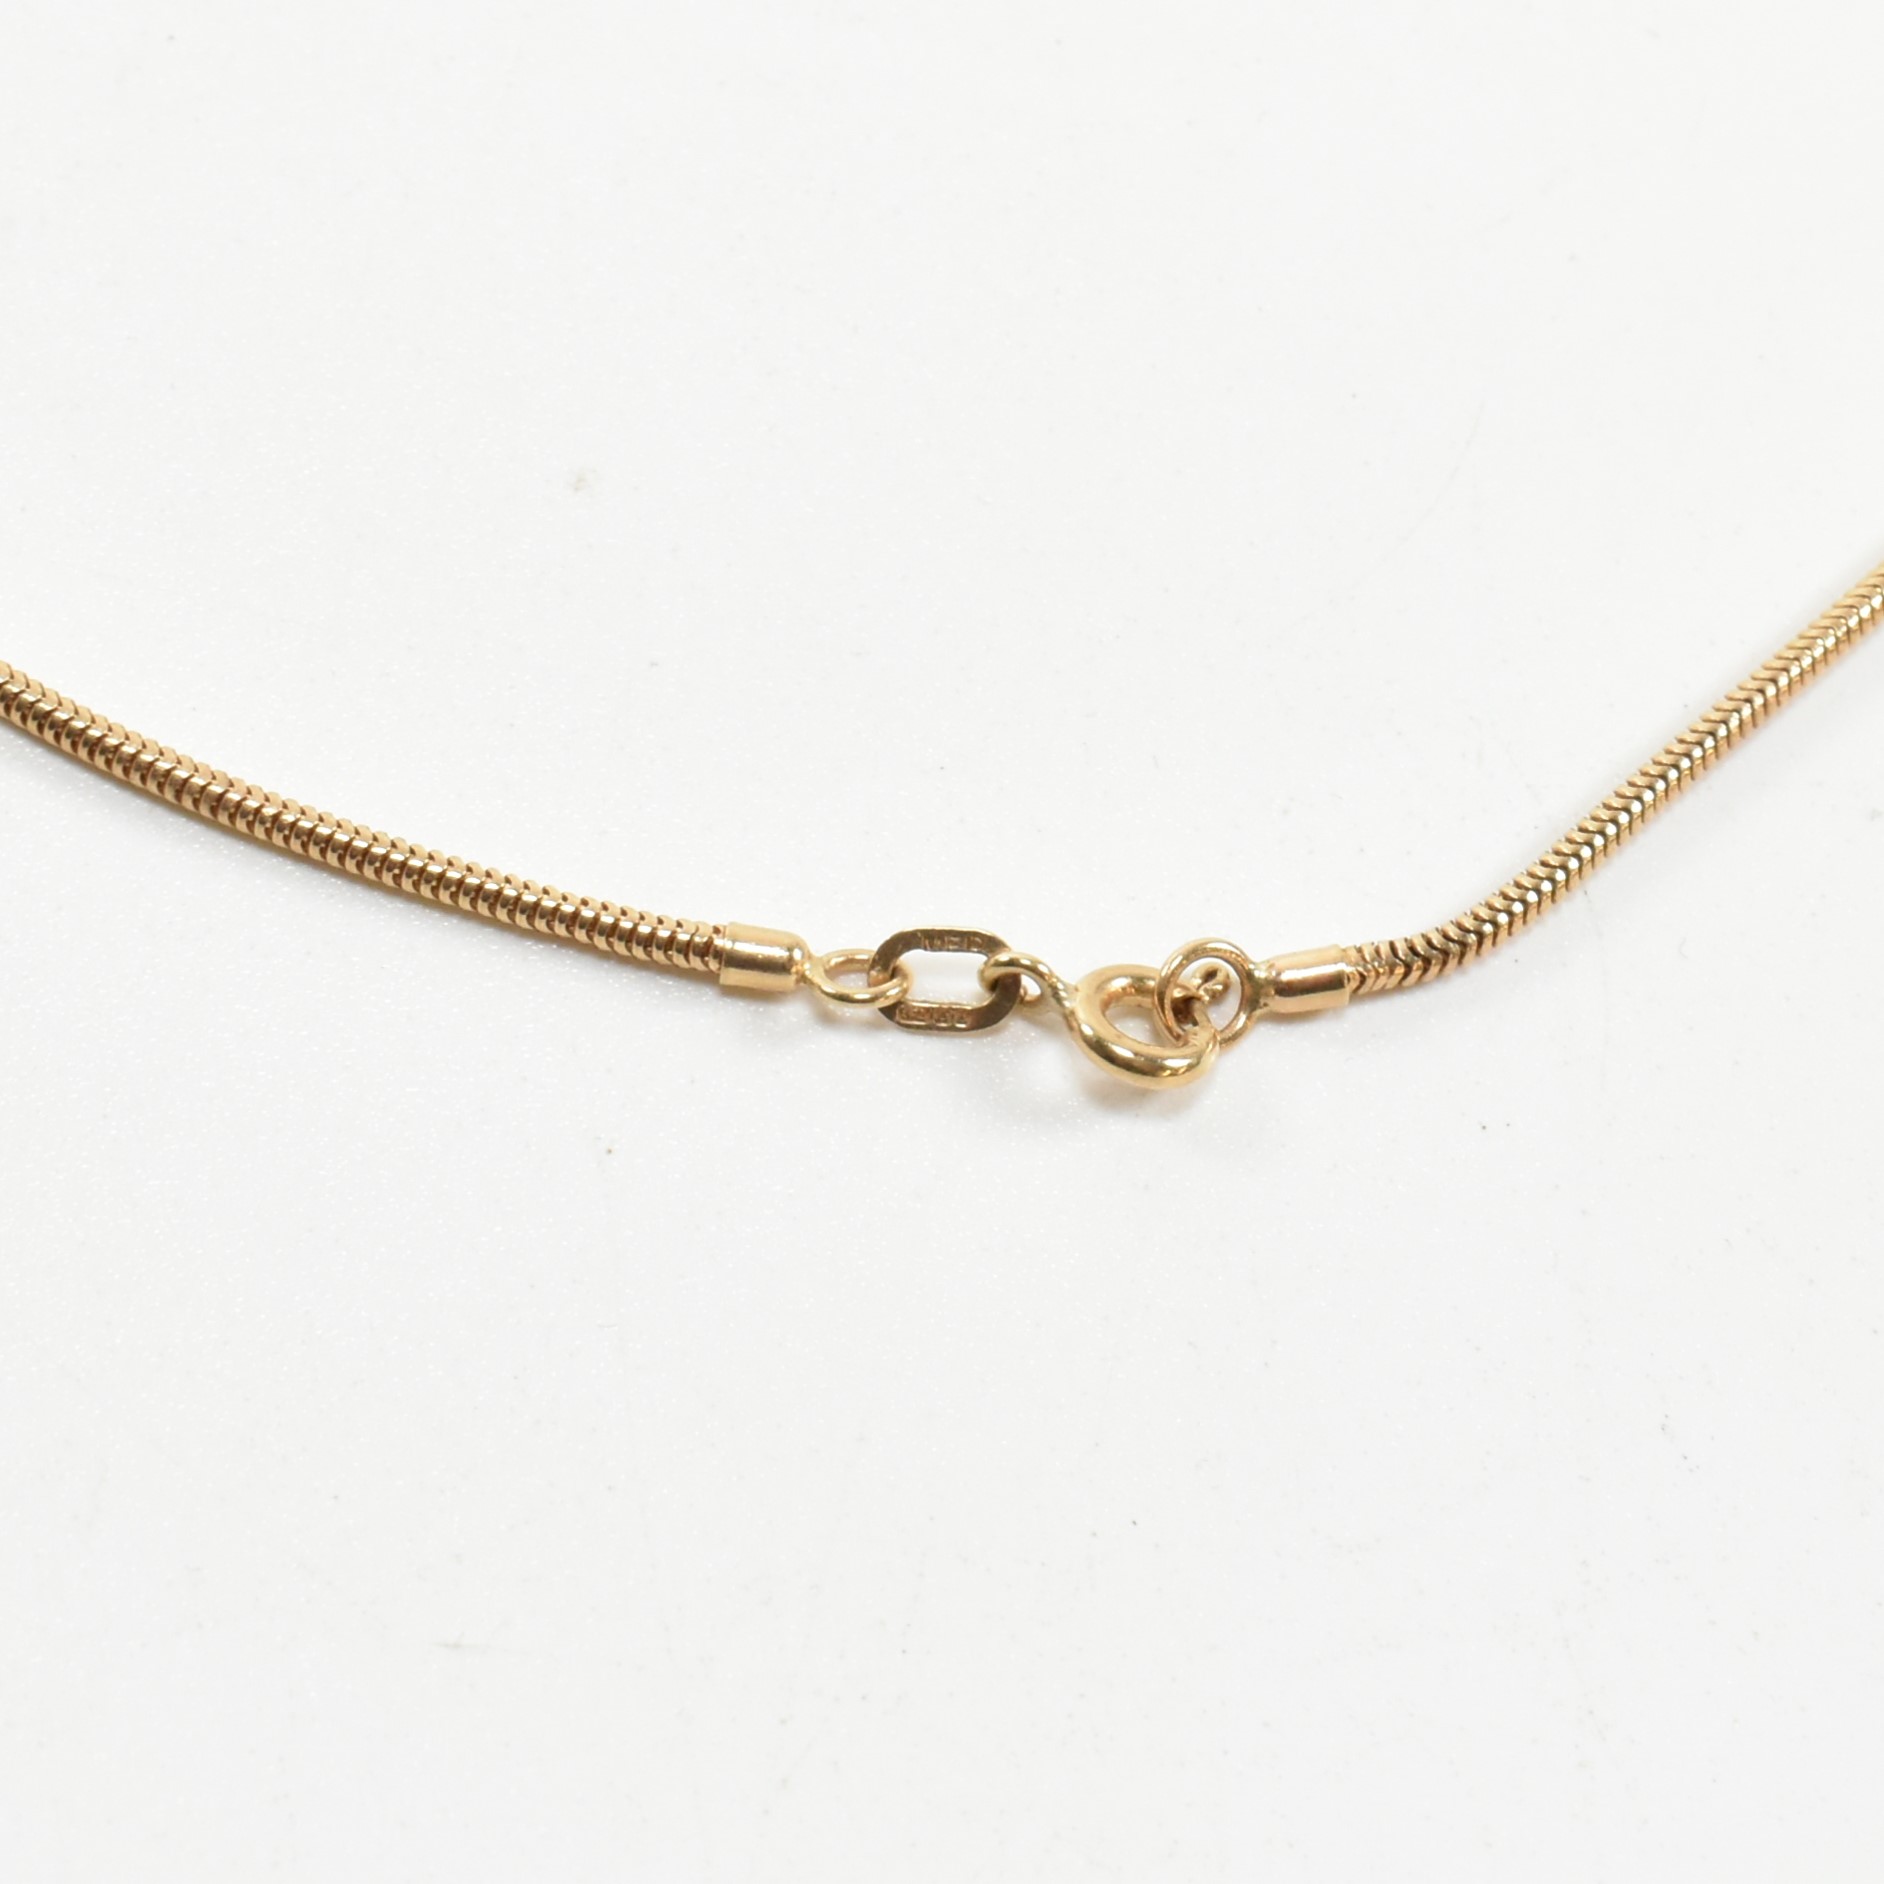 HALLMARKED 9CT GOLD SNAKE CHAIN NECKLACE - Image 3 of 4